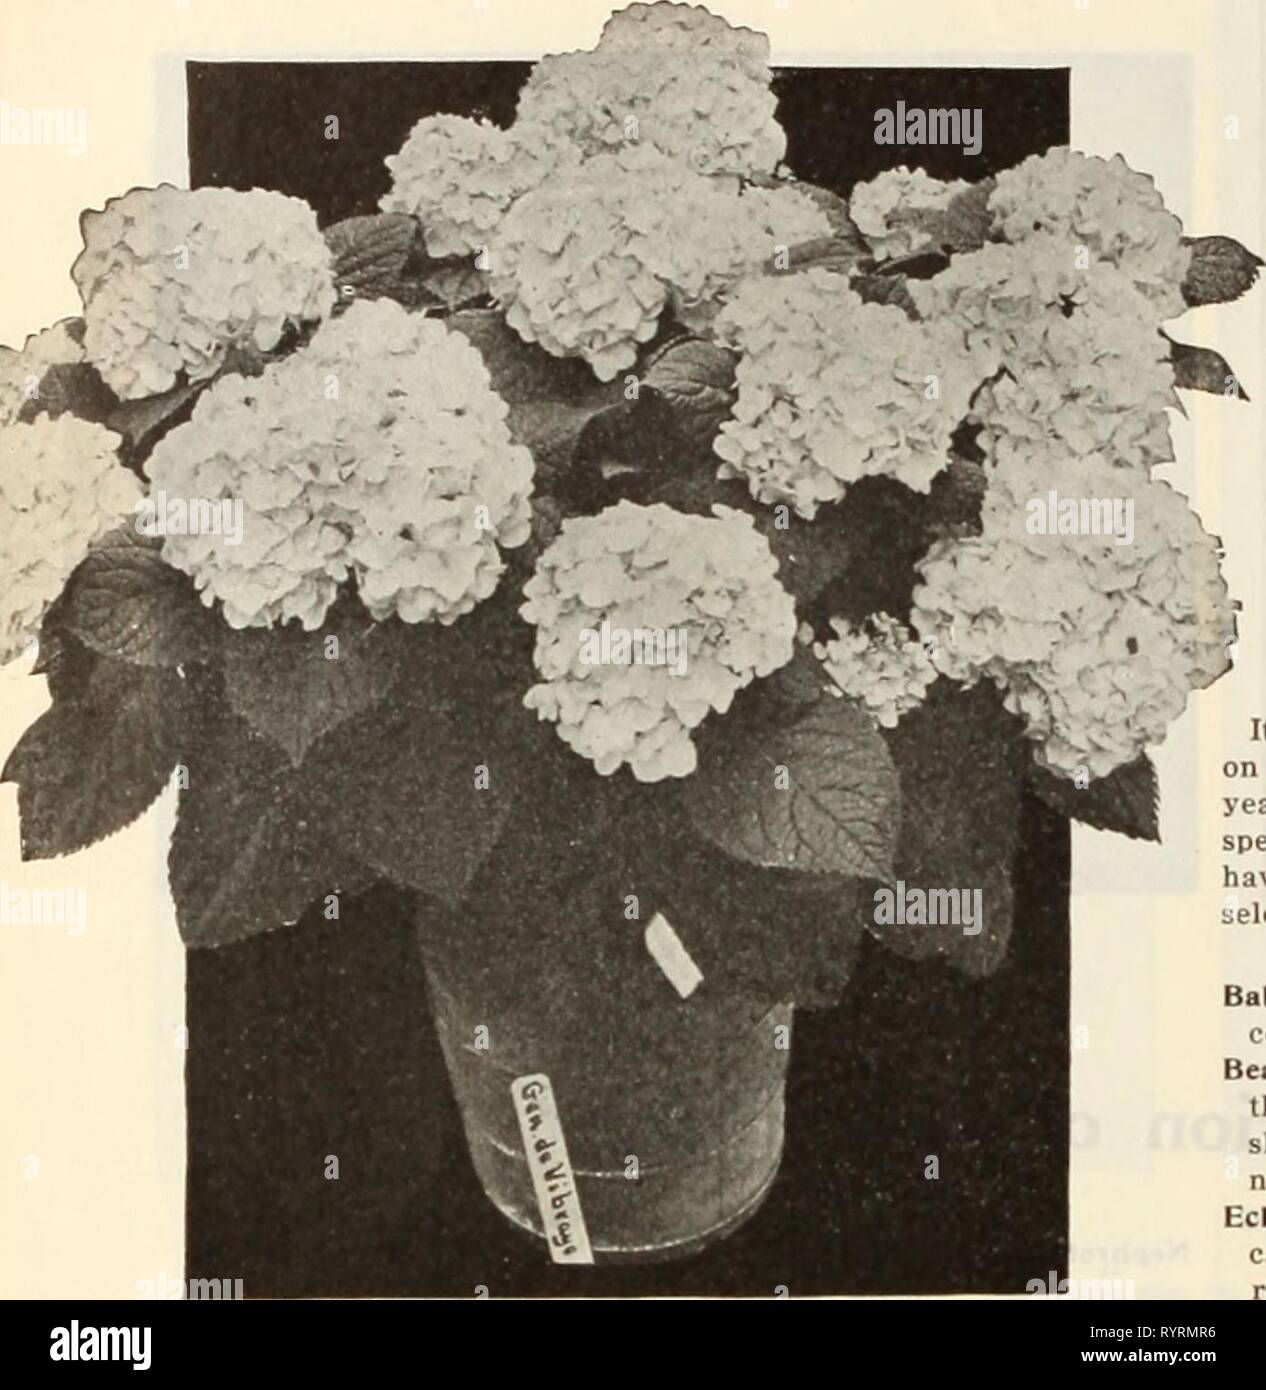 Dreer's wholesale price list of Dreer's wholesale price list of seeds, plants, bulbs, etc . dreerswholesalep1915henr 1 Year: 1915  38 HENRY A. DREER, PHILADELPHIA, PA., WHOLESALE PRICE LIST    NEW FRENCH HYDRANGEA Lille Moultlere. Similar to but distinct from Eclaireur, a brisbt carmine-rose. Louis Moulllere. A very distinct and valuable variety, a fine shade of deep rosy pink frinsred florets in trusses of immense size. Mme. Aueuste Nonln. An unusually attractive pretty pale pink in heads of larcre size. Mons. Qhys. Very vigorous trrowine and extremely free-flower- ine with large trusses of p Stock Photo